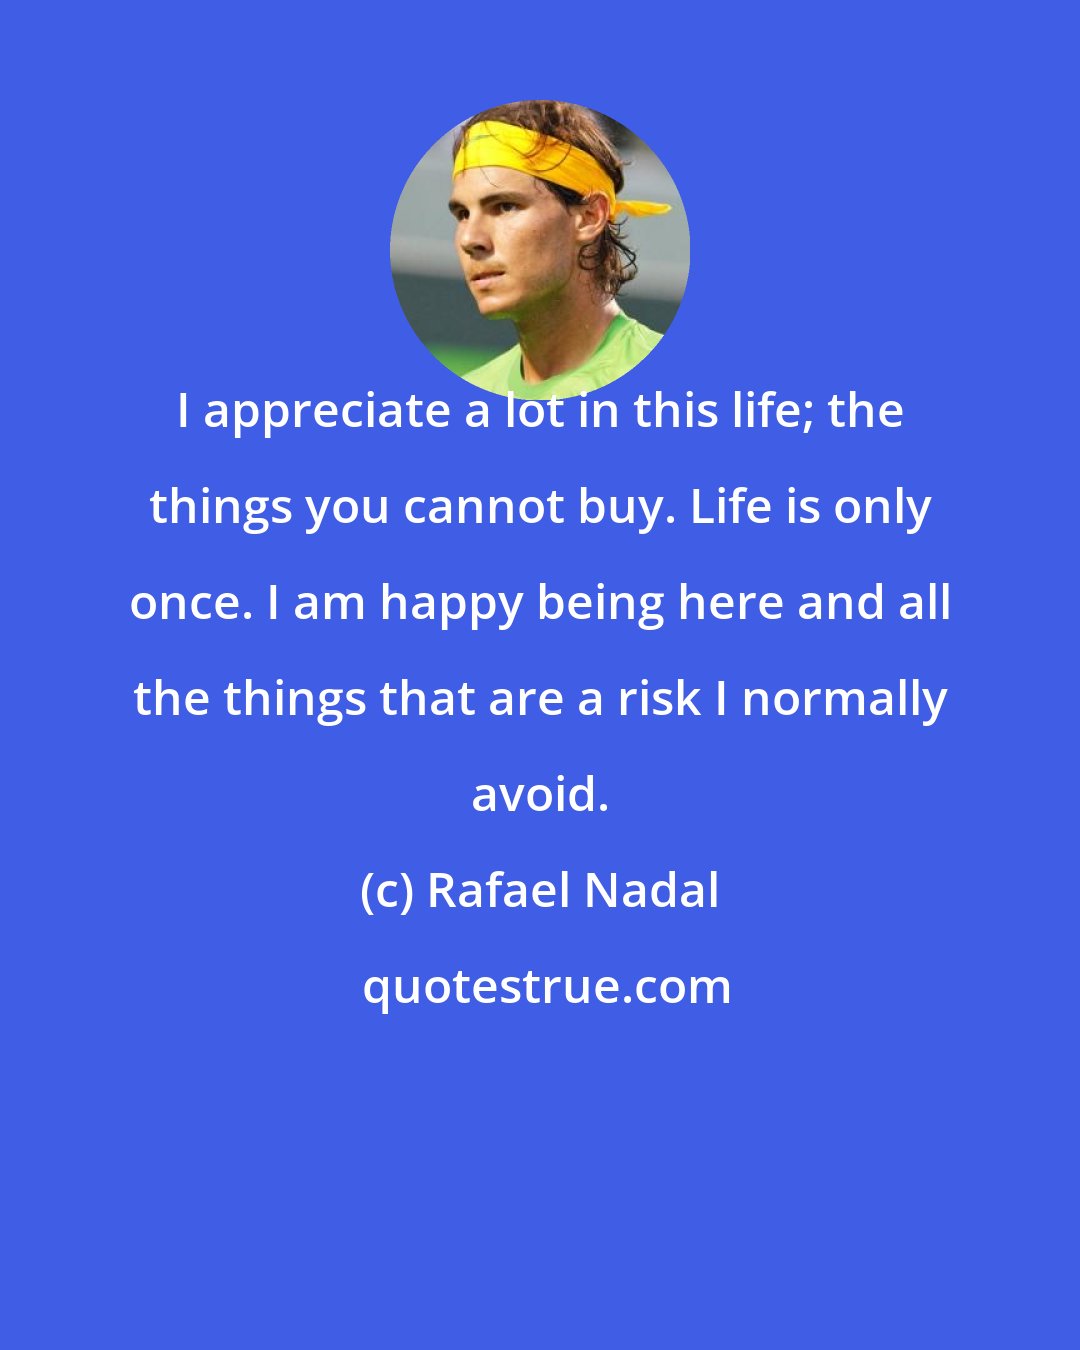 Rafael Nadal: I appreciate a lot in this life; the things you cannot buy. Life is only once. I am happy being here and all the things that are a risk I normally avoid.